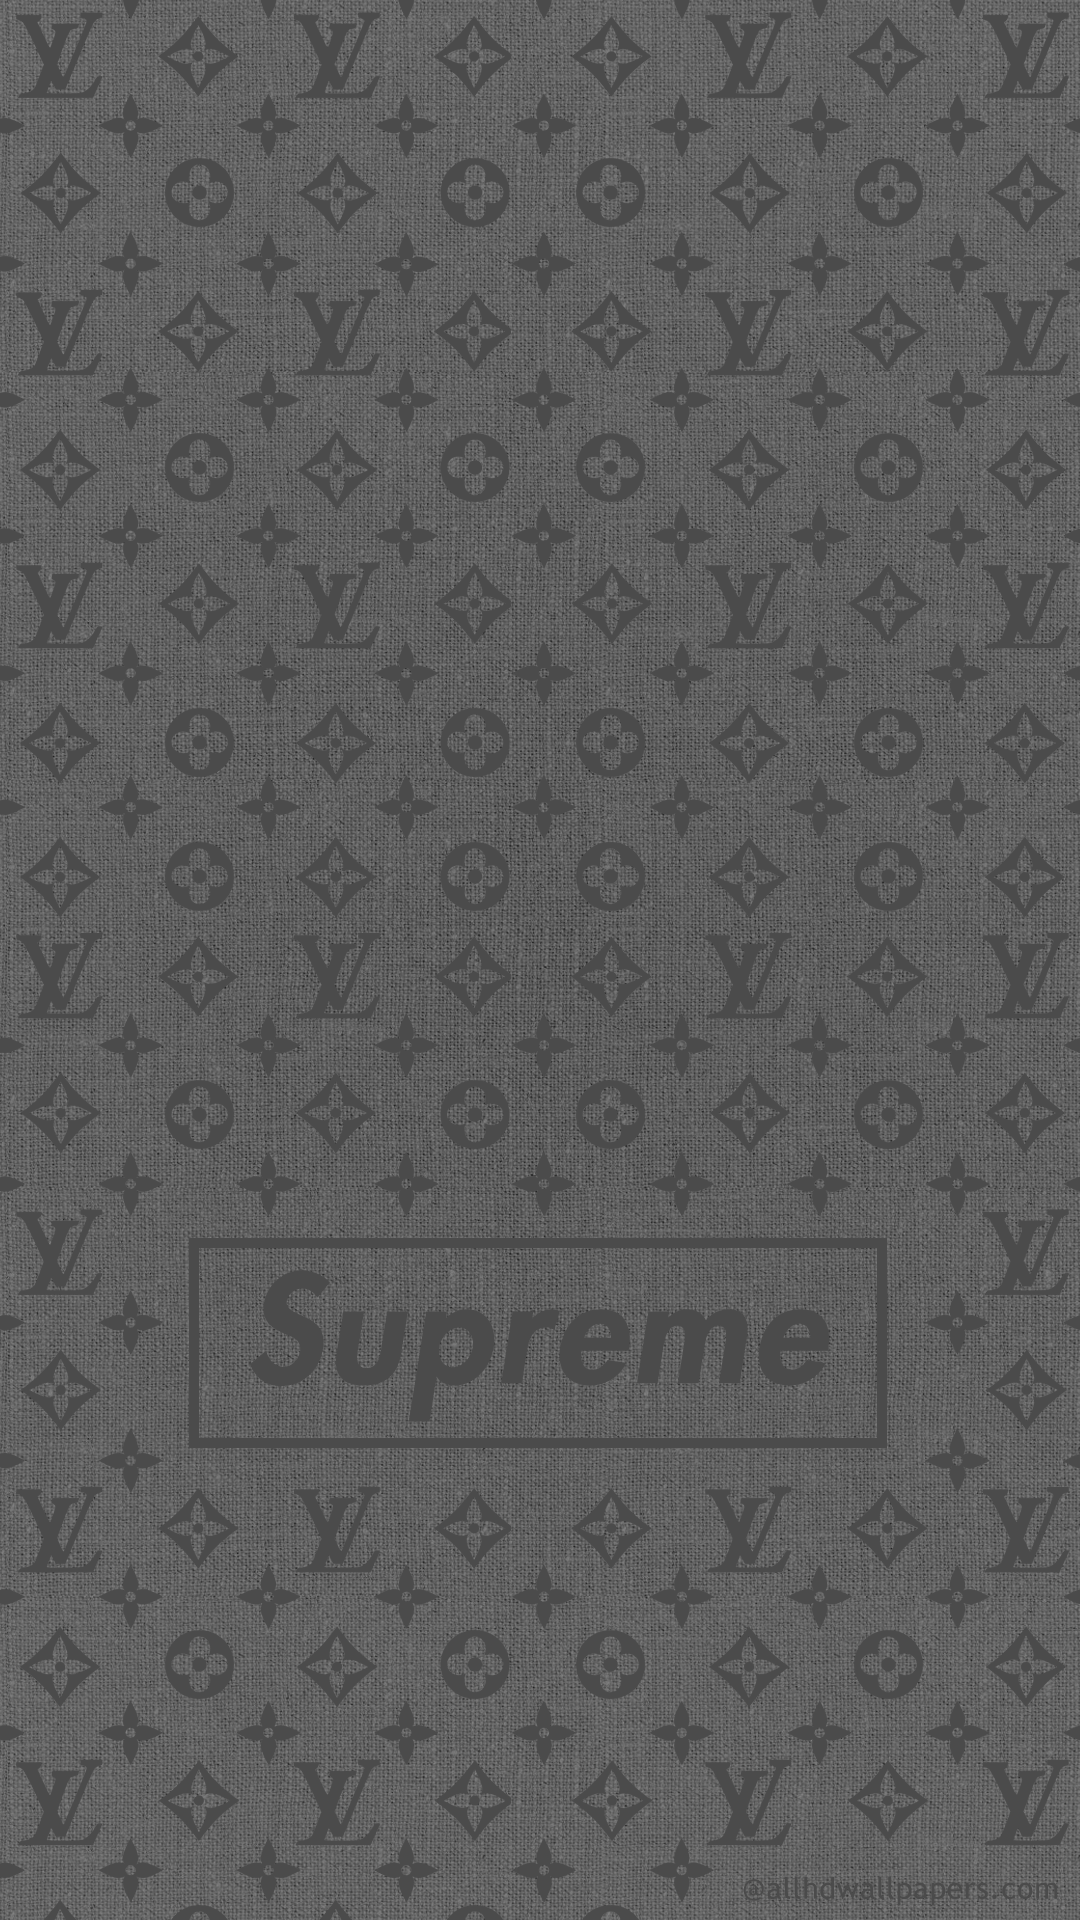 50+ Supreme Laptop Wallpapers: HD, 4K, 5K for PC and Mobile | Download free  images for iPhone, Android